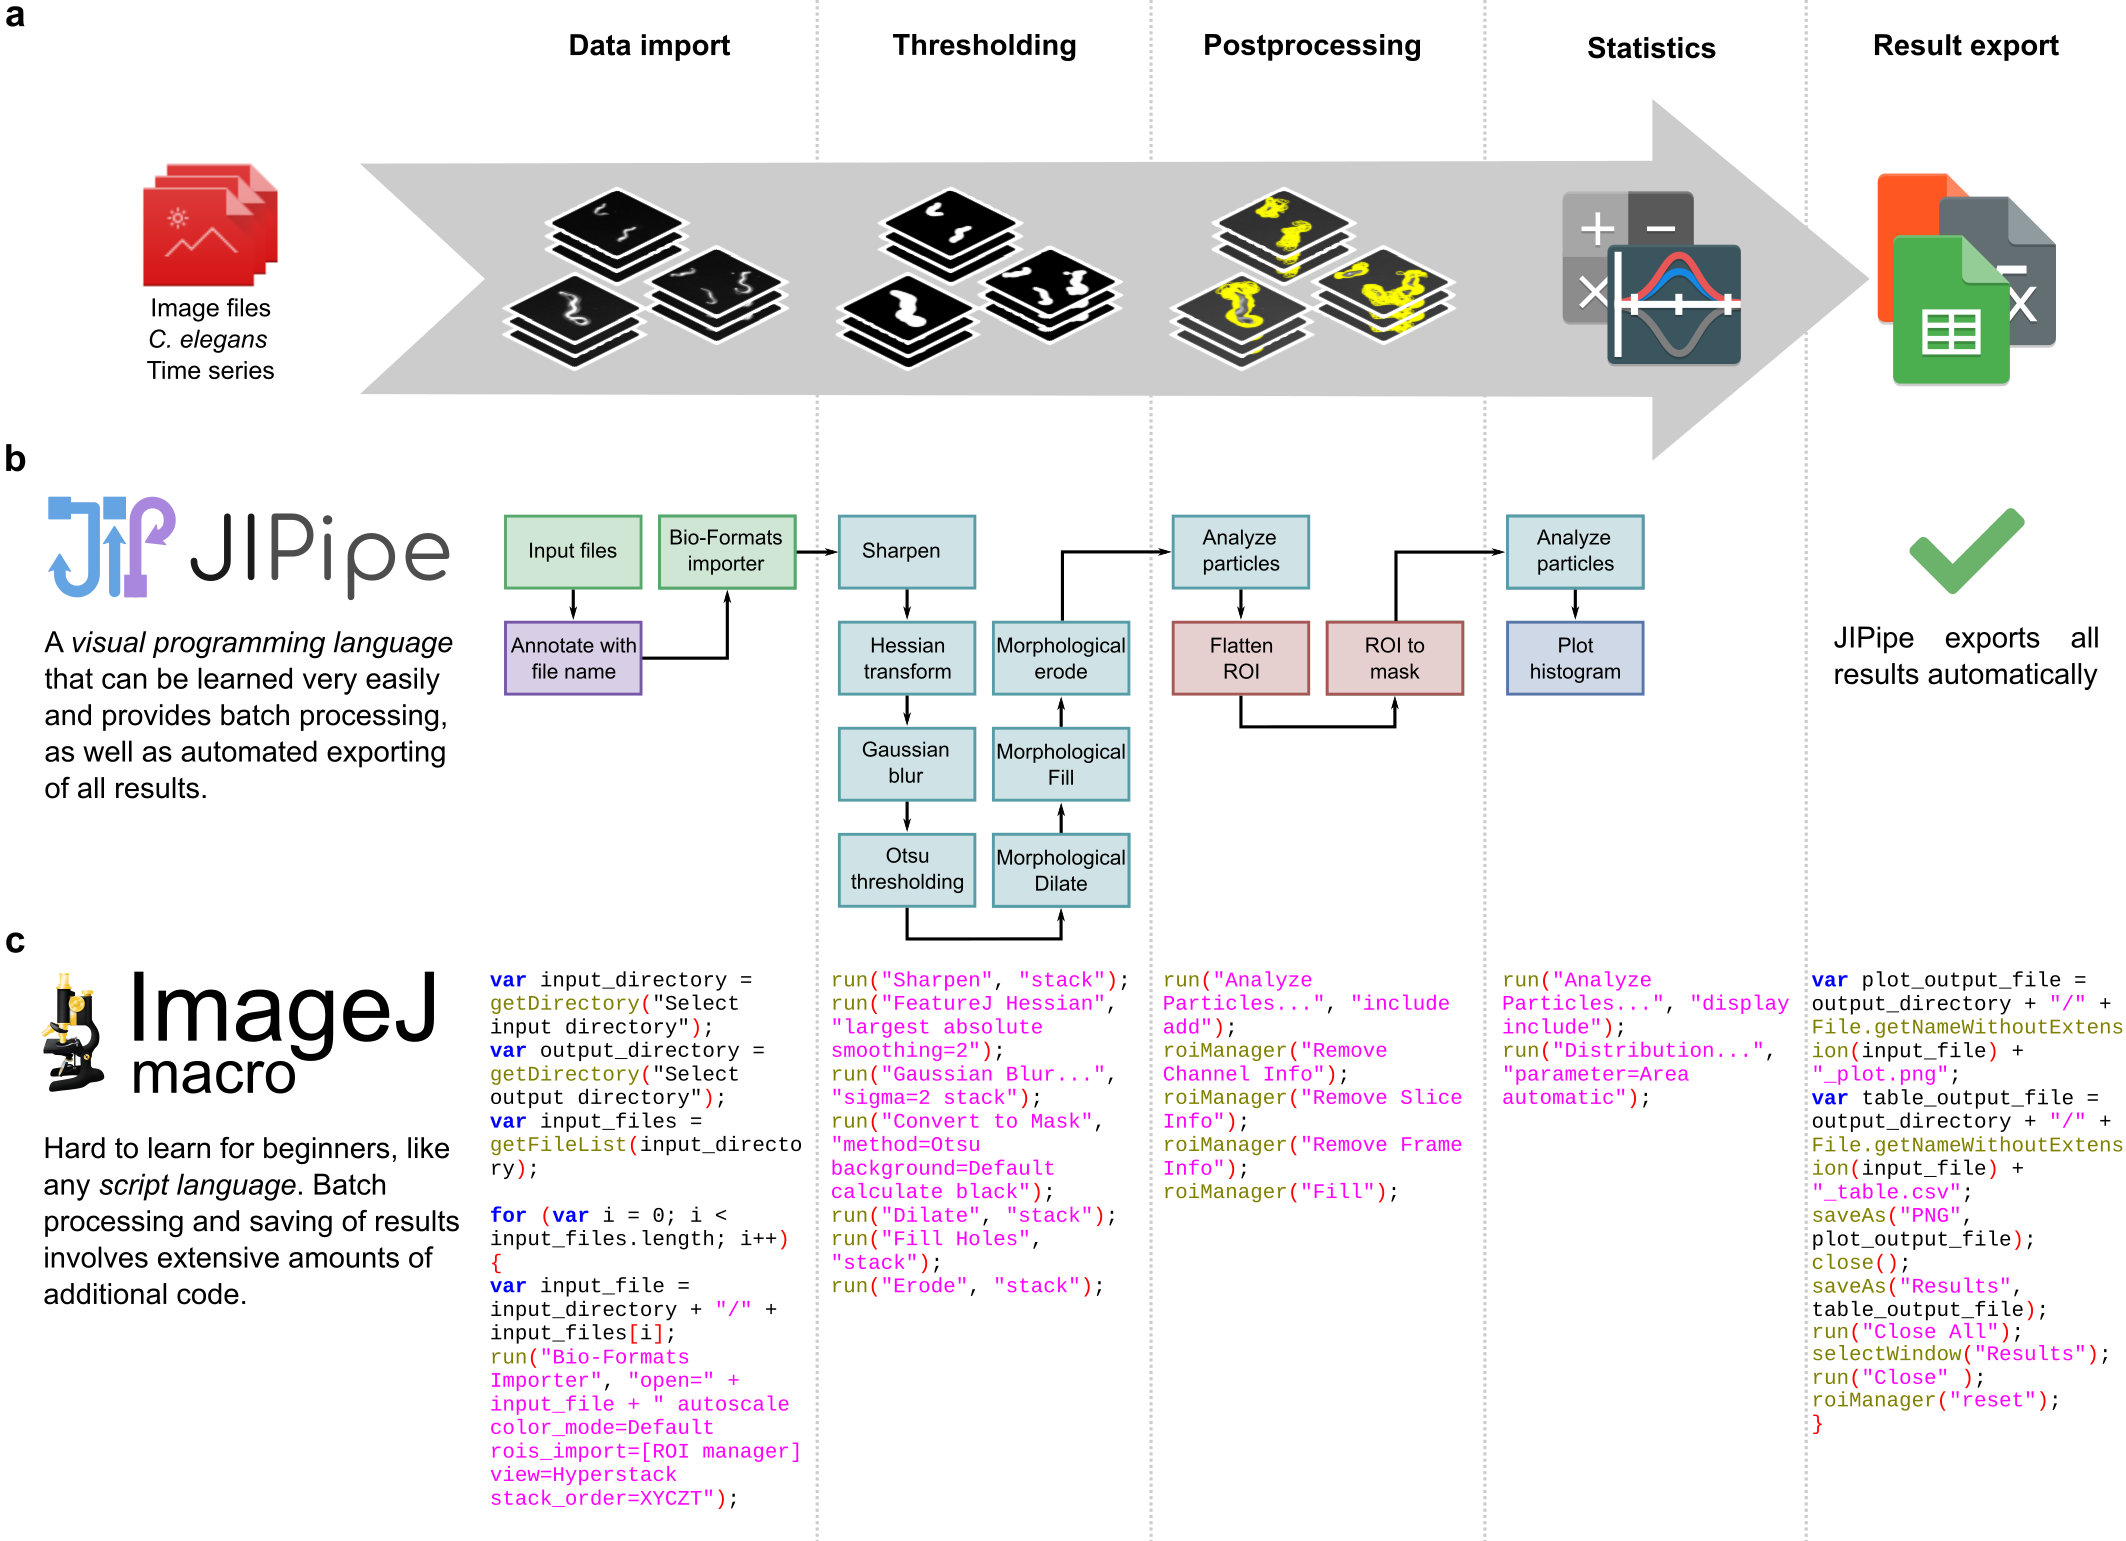 JIPipe makes the development of image analysis pipelines intuitive and easy to follow.